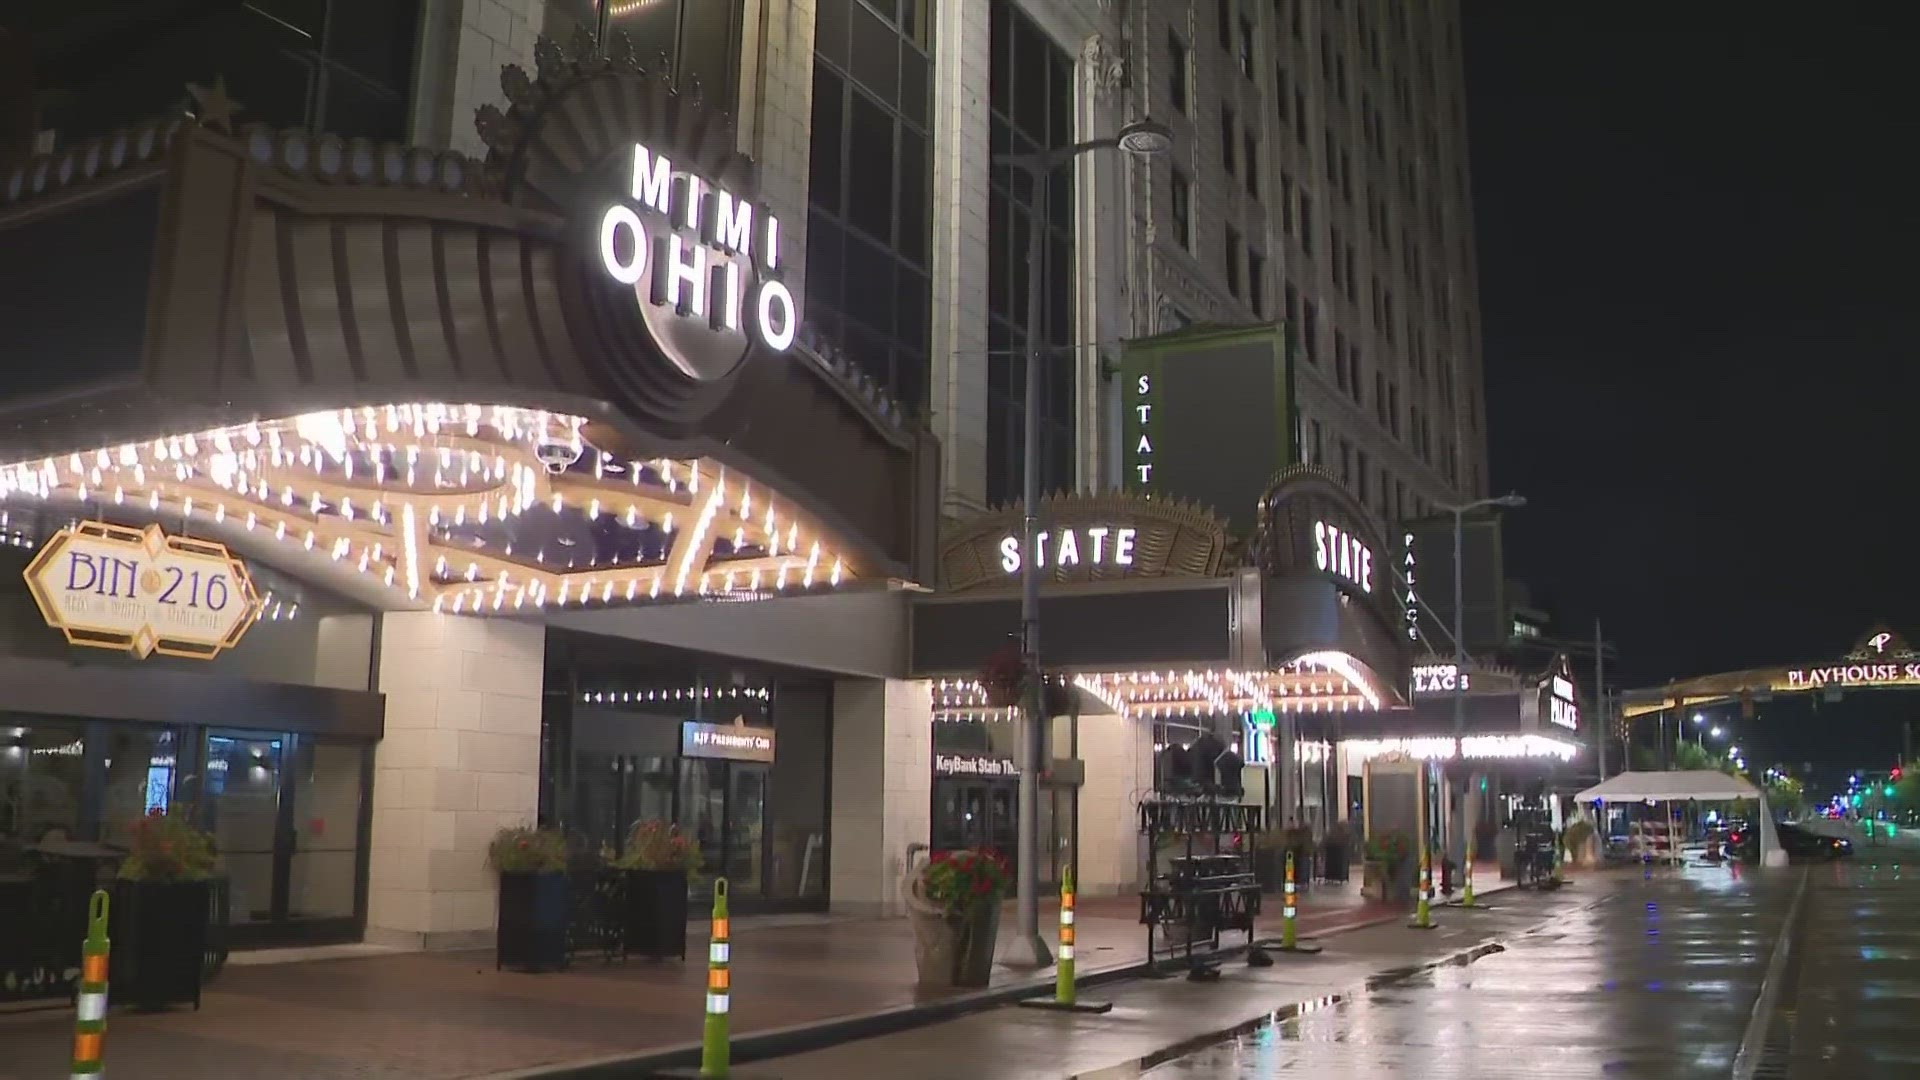 Playhouse Square in Cleveland is ready for its next act as the iconic theater district officially unveils their new marquees during an event Thursday night.